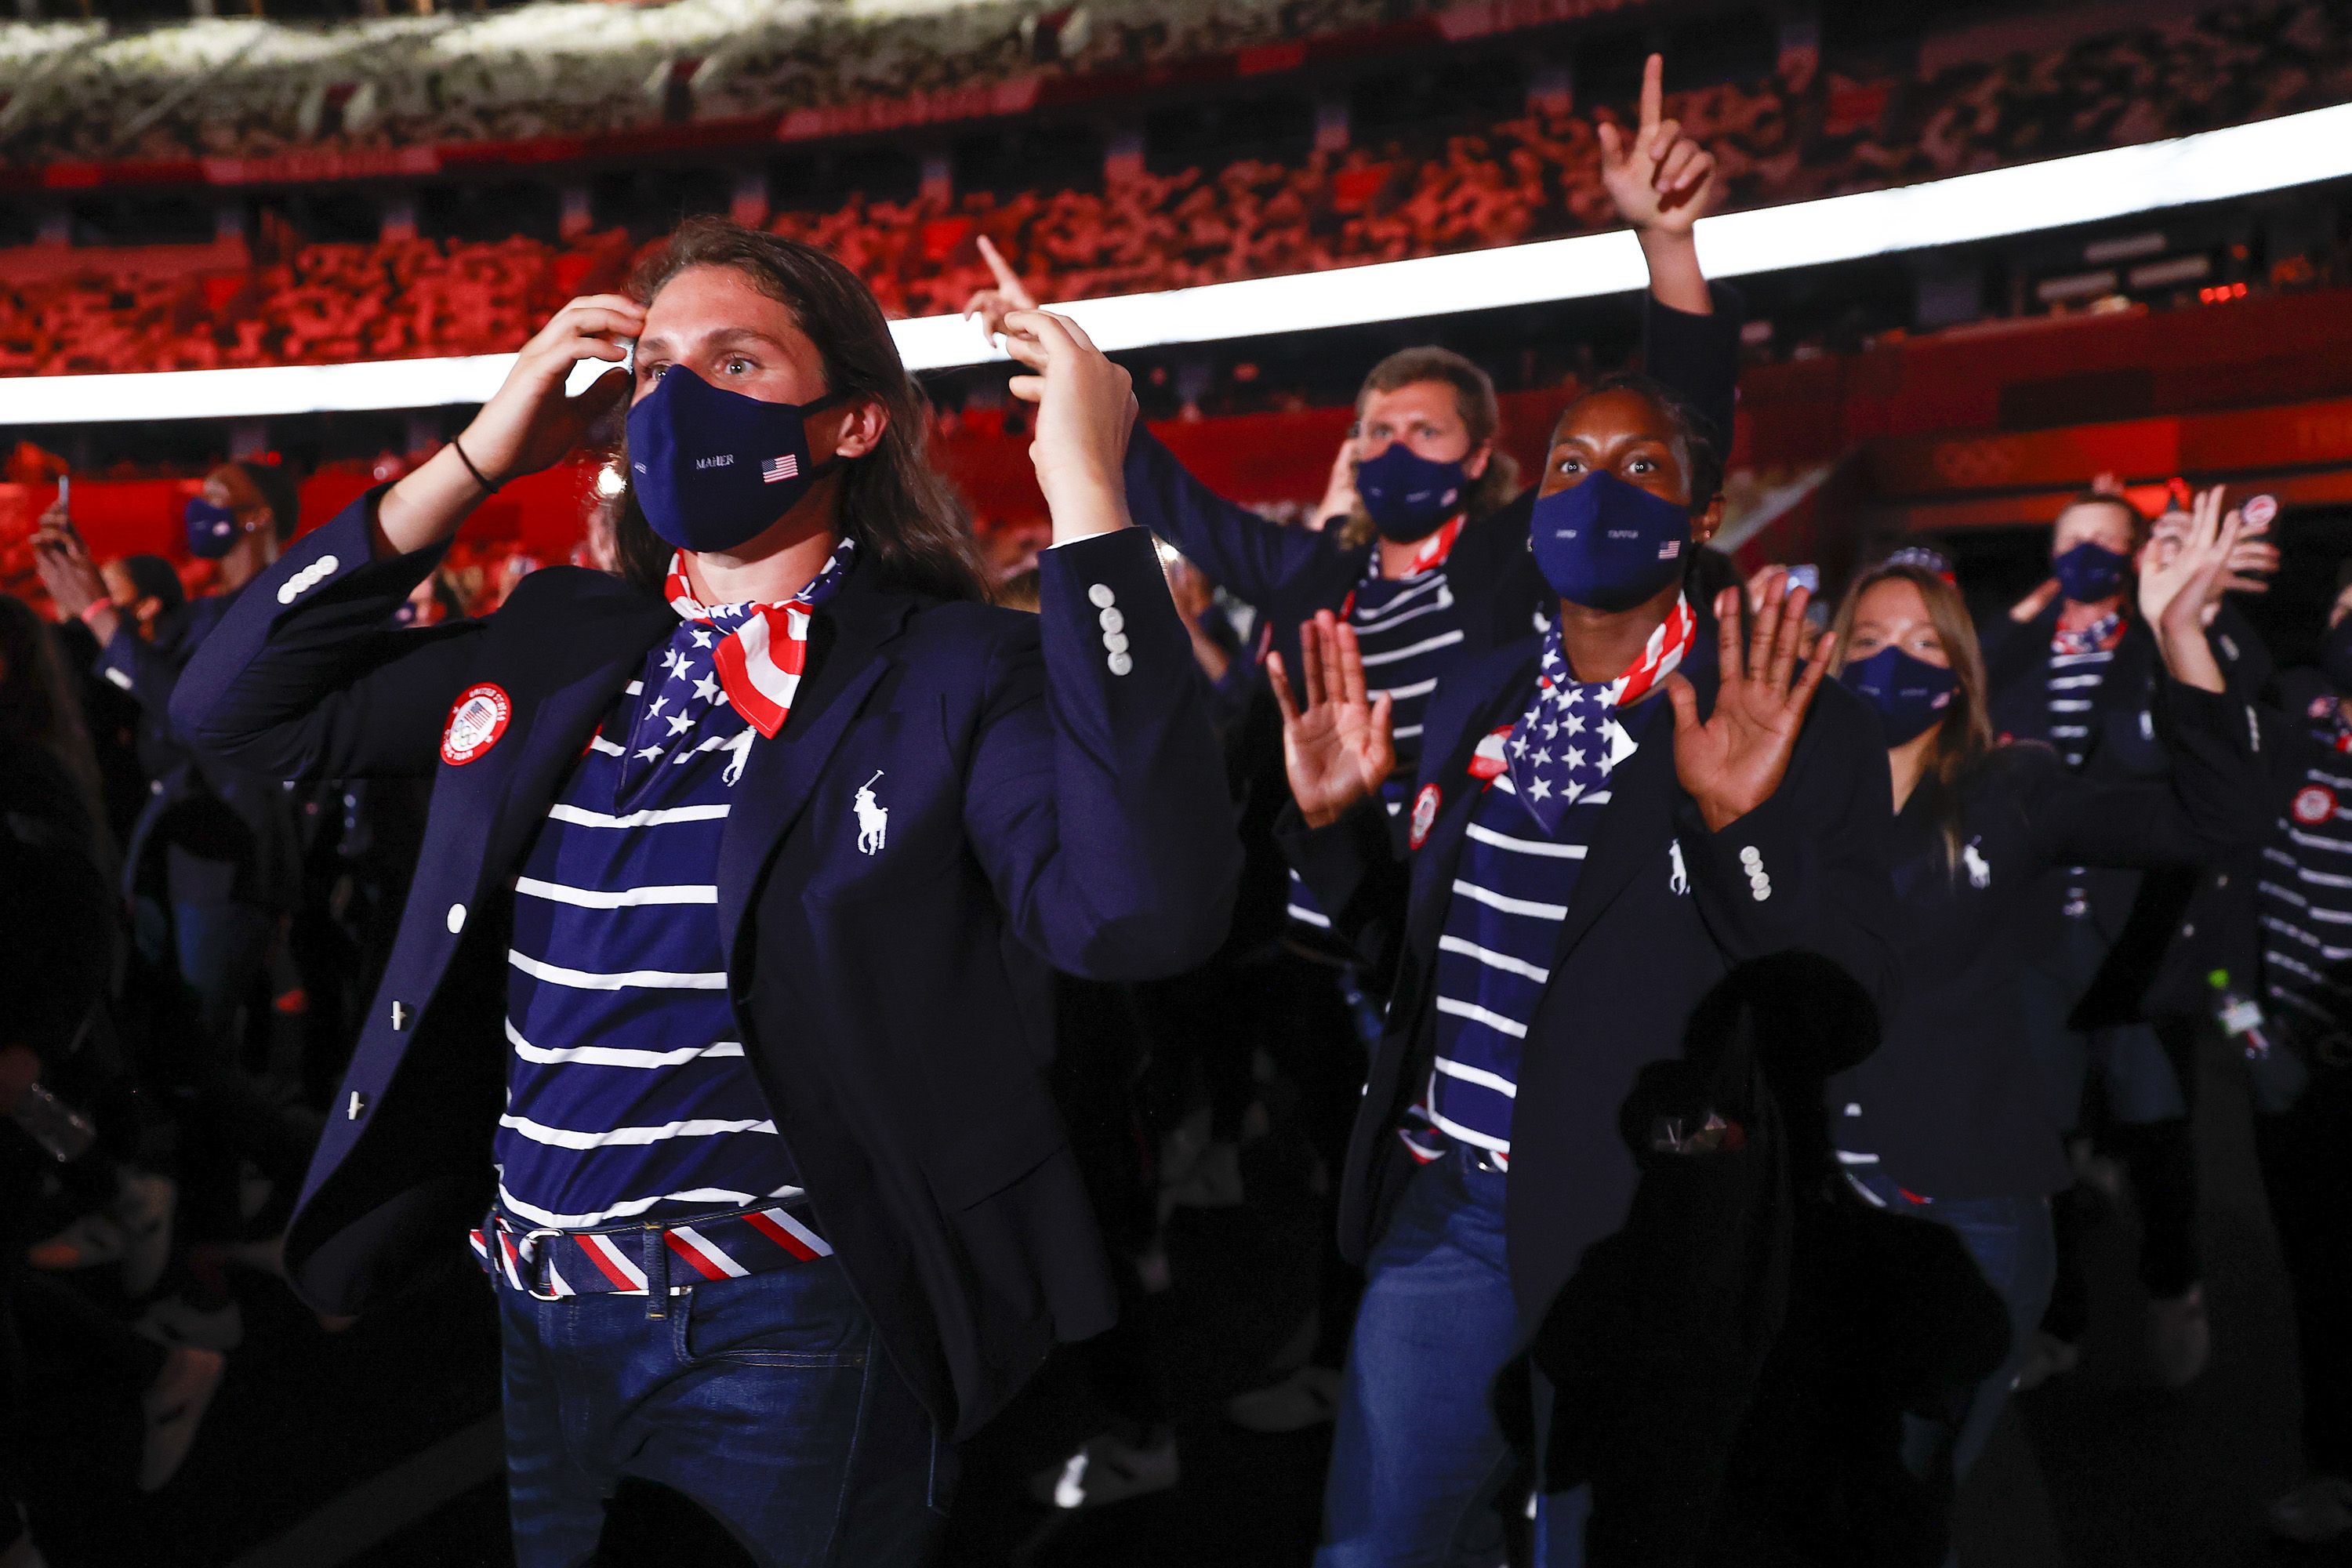 Patriotic style: Team USA reveals Olympic Opening Ceremony uniforms